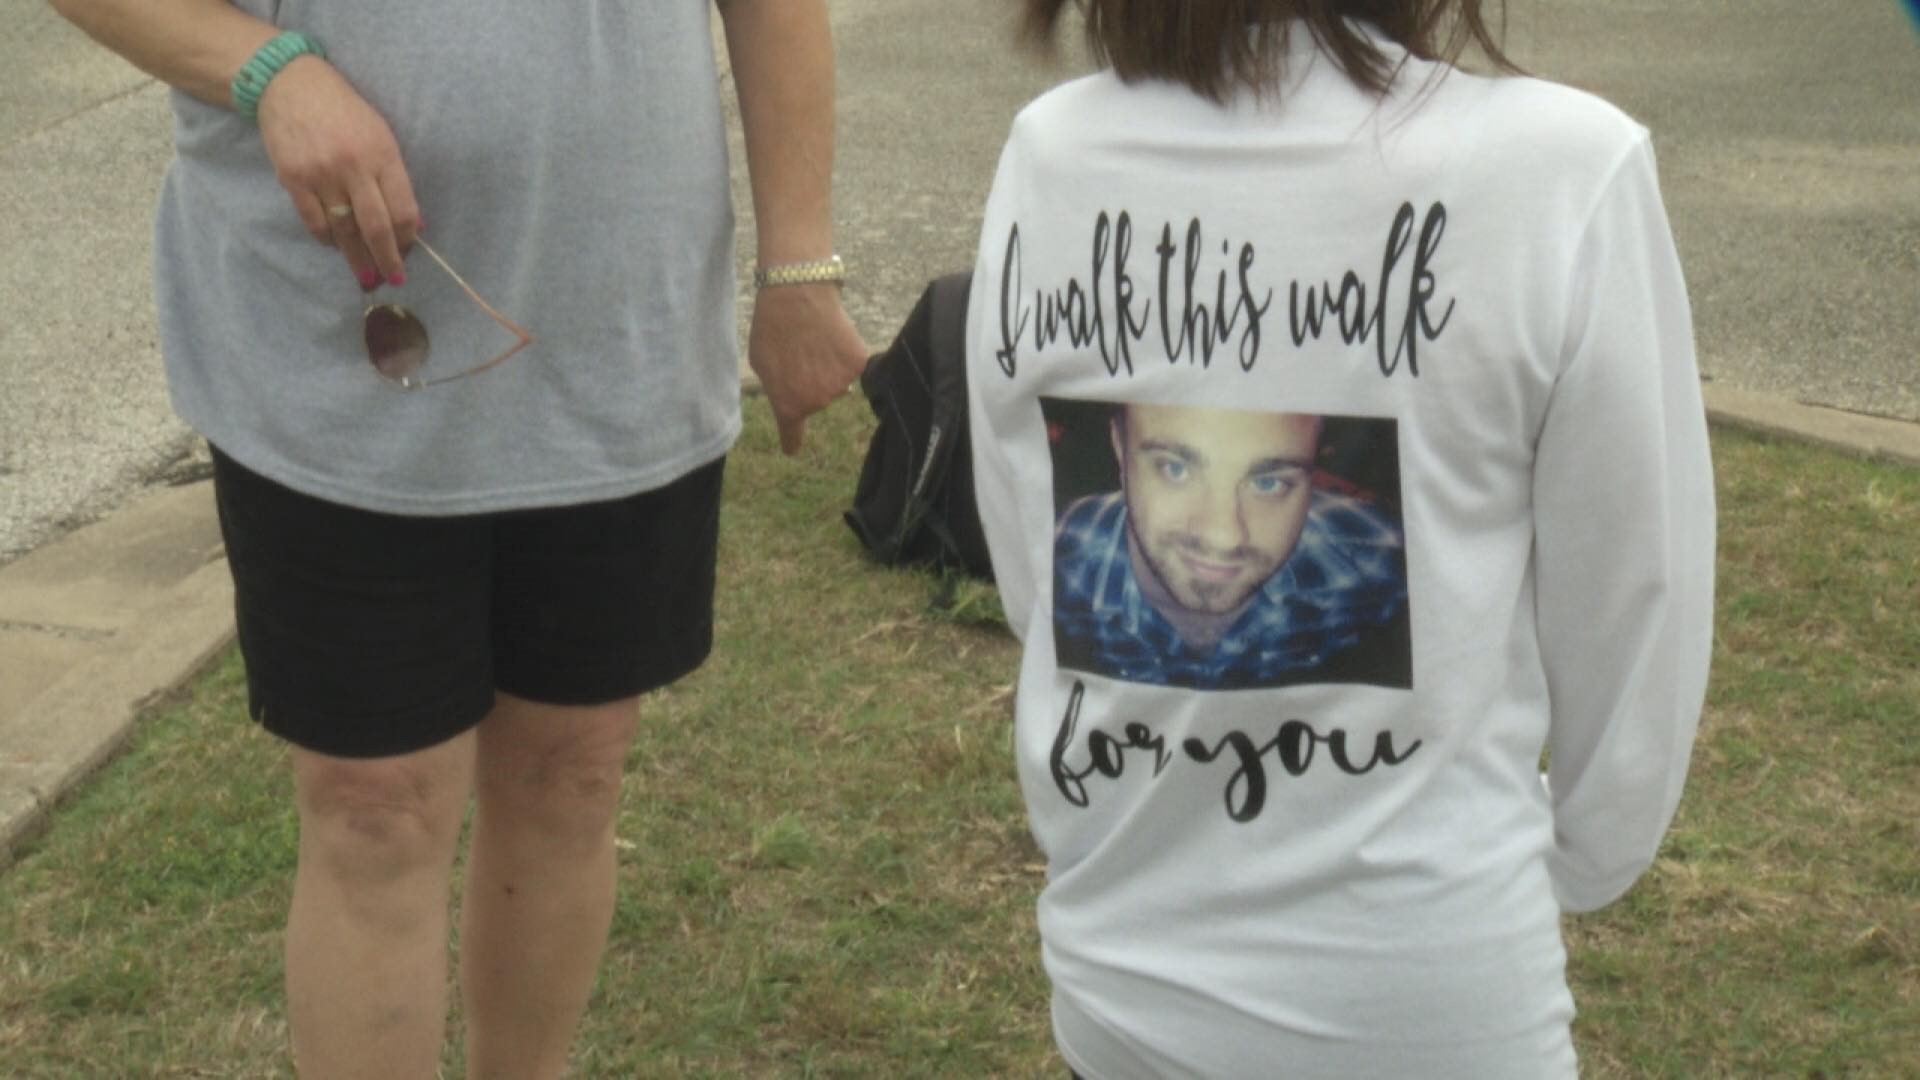 More than 100 people ran, walked and roller skated through Temple's Pepper Creek Trail to help a new non-profit started by friends and family of a Temple duo killed in January.